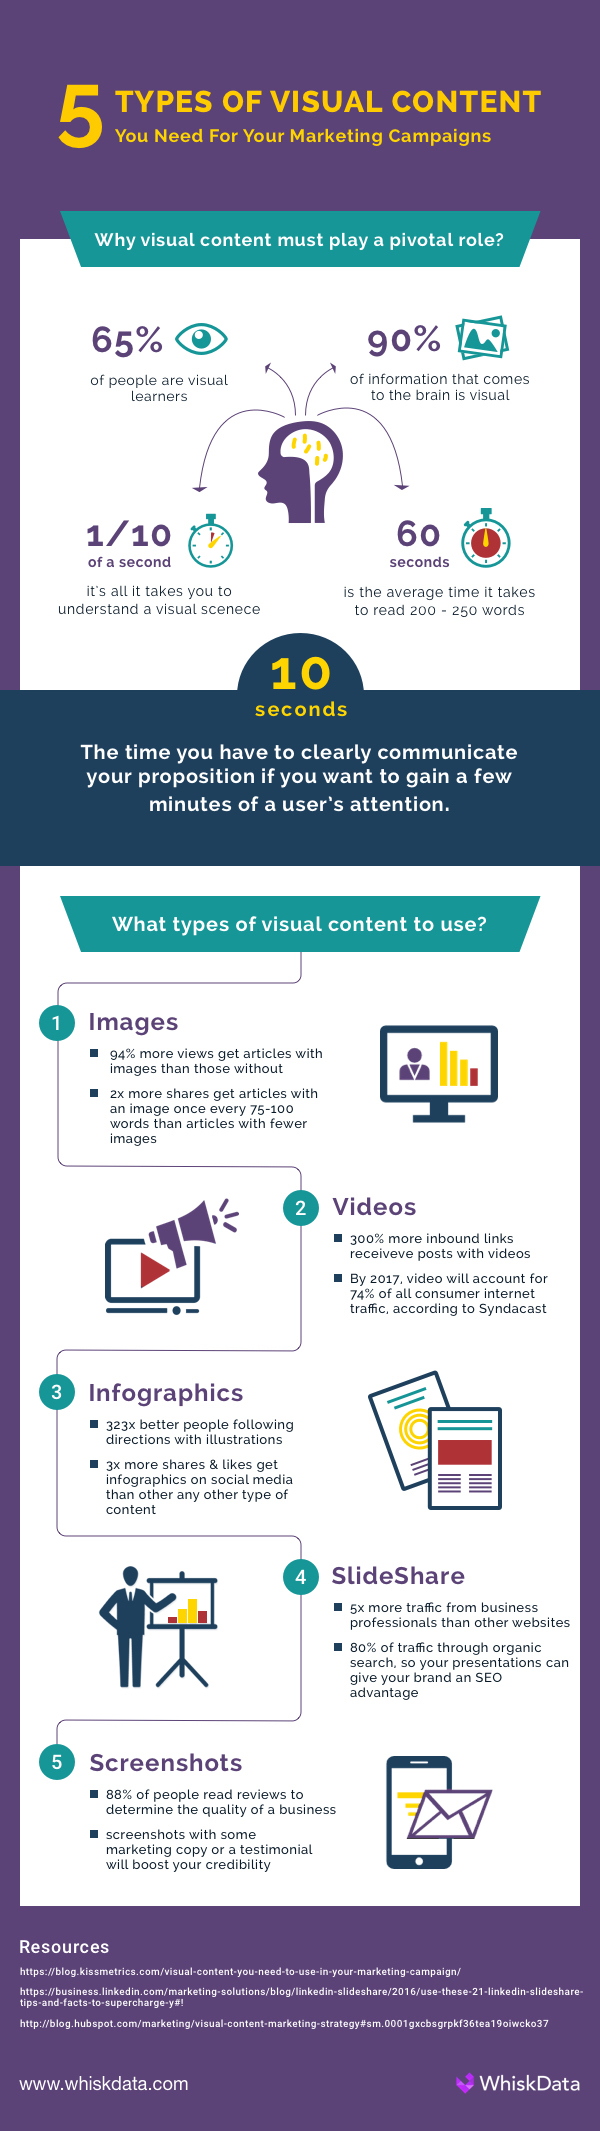 5 types of visual content to include in your marketing strategy infographic